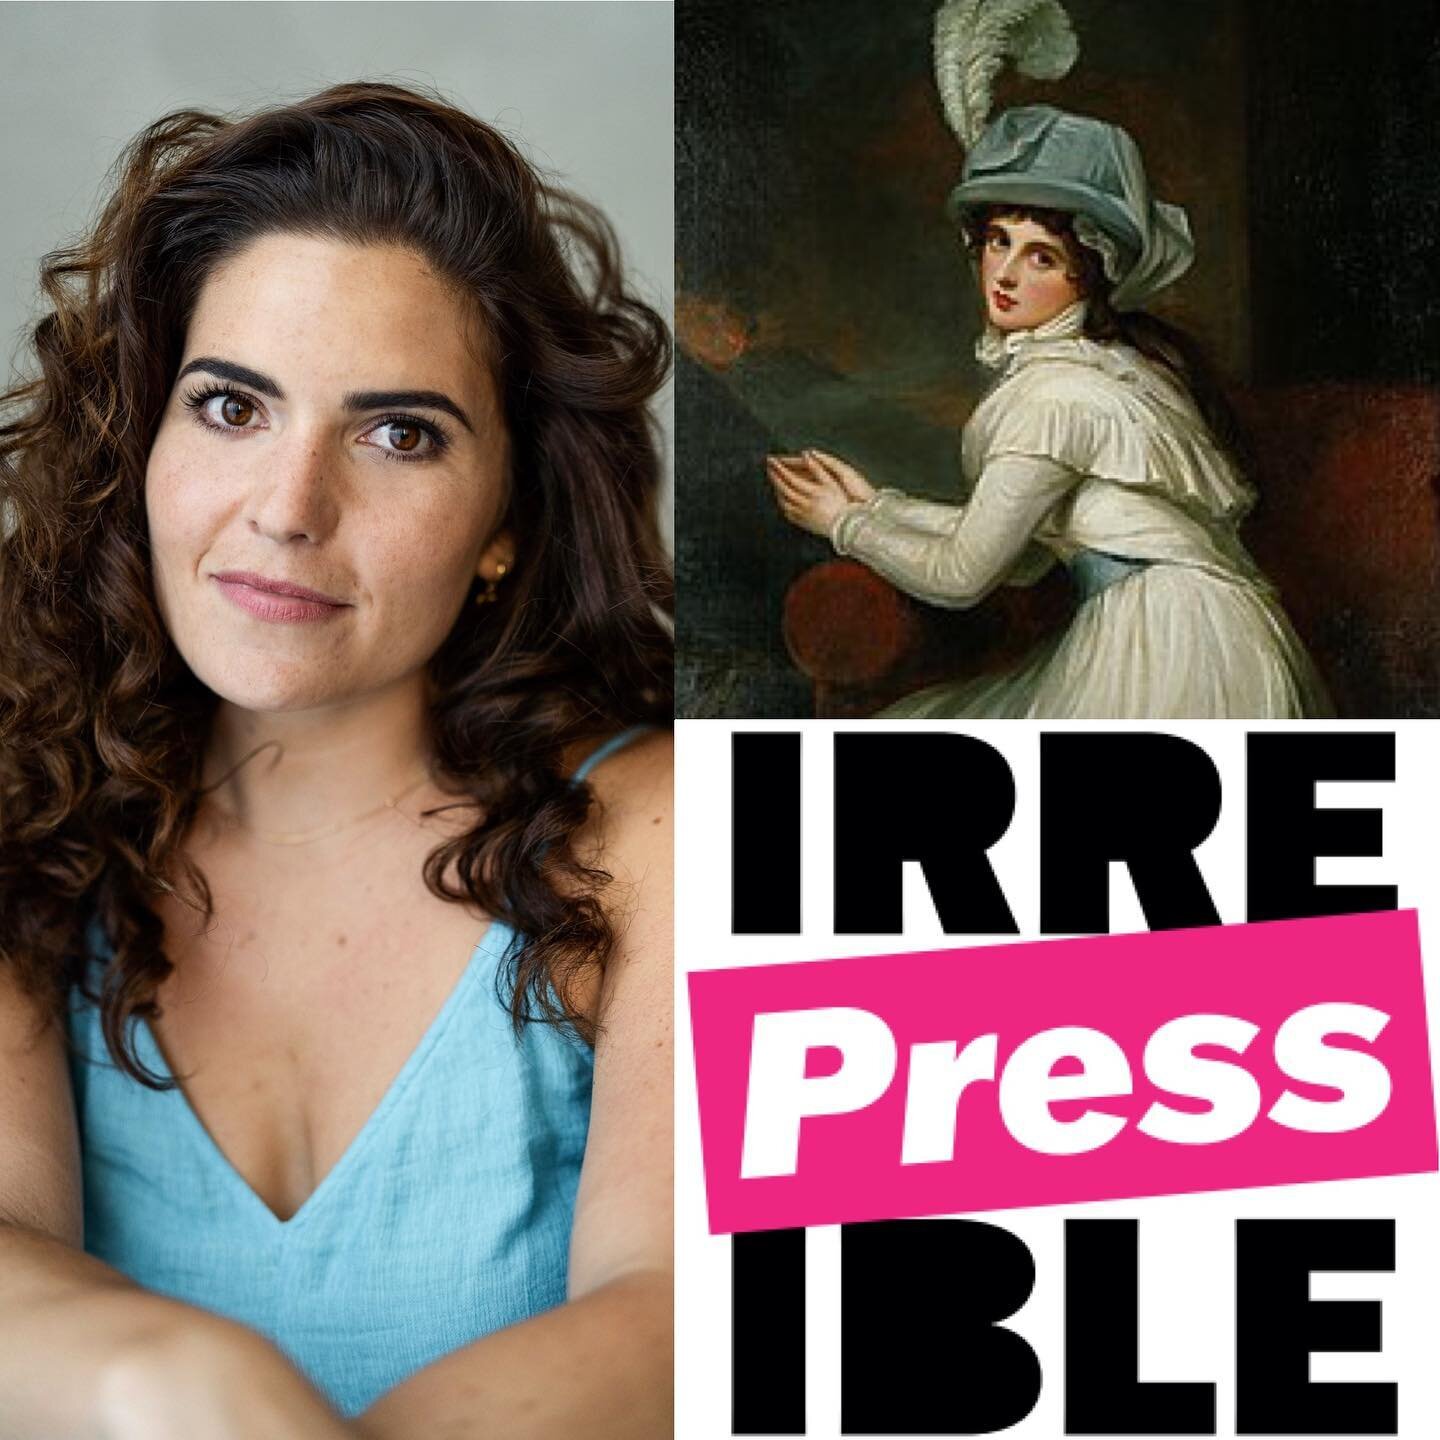 ✨ One week until we bring @irrepressible_the_musical to @edfringe!

I&rsquo;m honored to play the irrepressible, inimitable Emma Hamilton in this new musical about her life and our contemporary perspective of her legacy. A woman who pushed through th